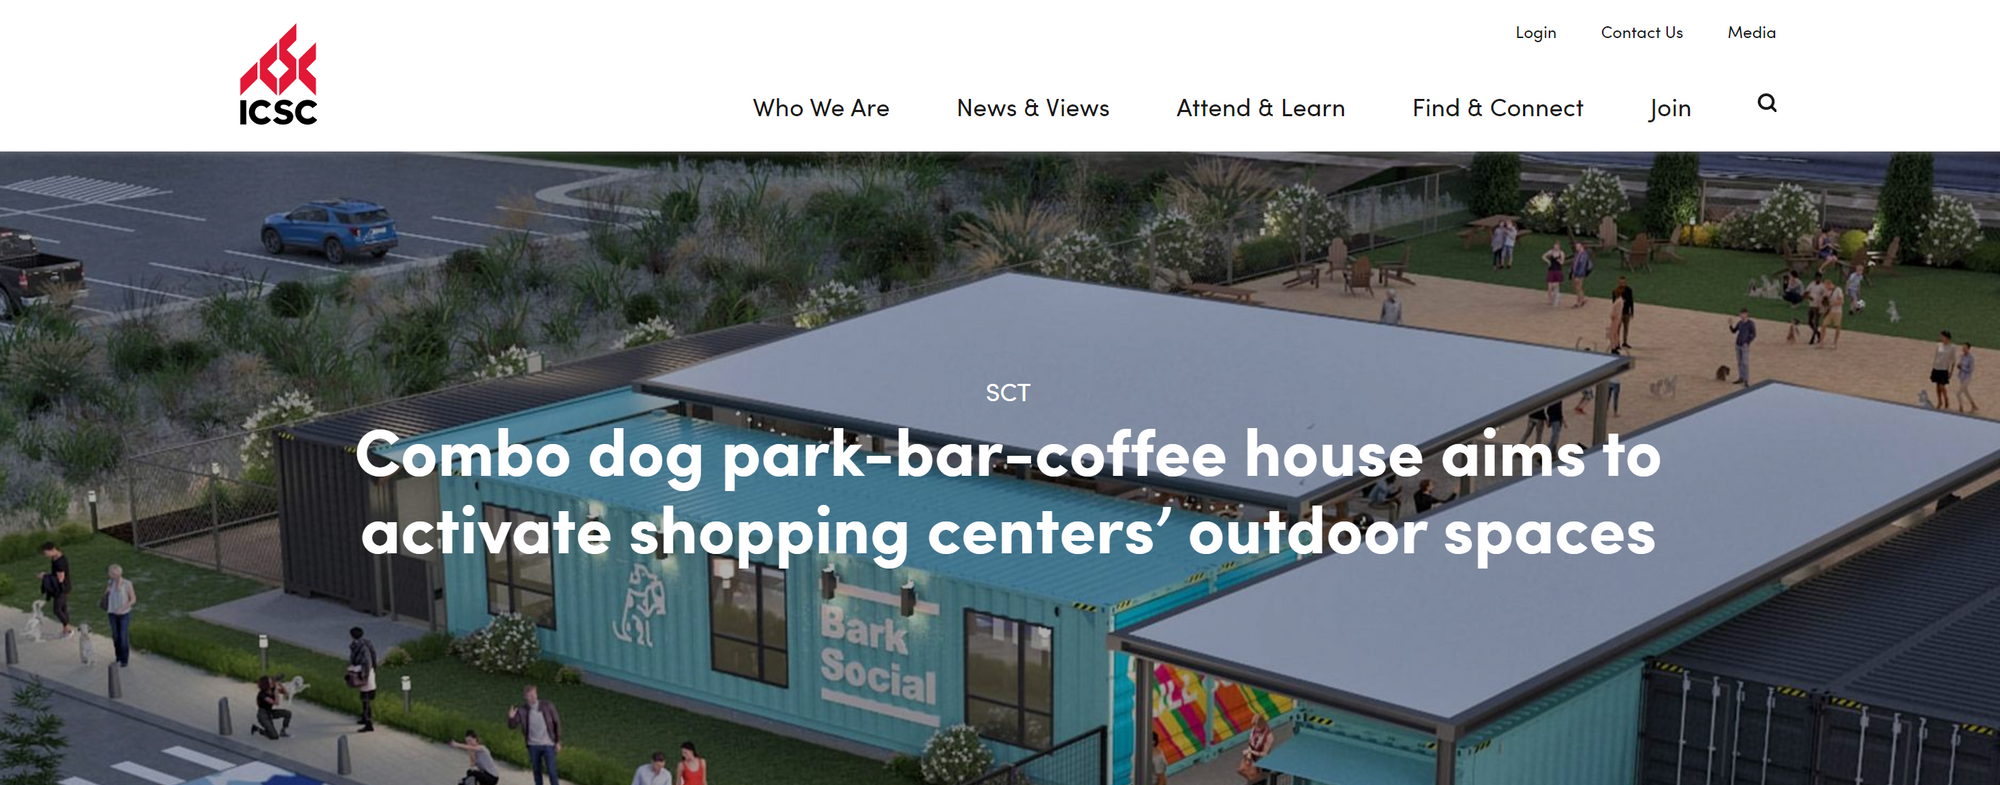 Combo dog park-bar-coffee house aims to activate shopping centers’ outdoor spaces